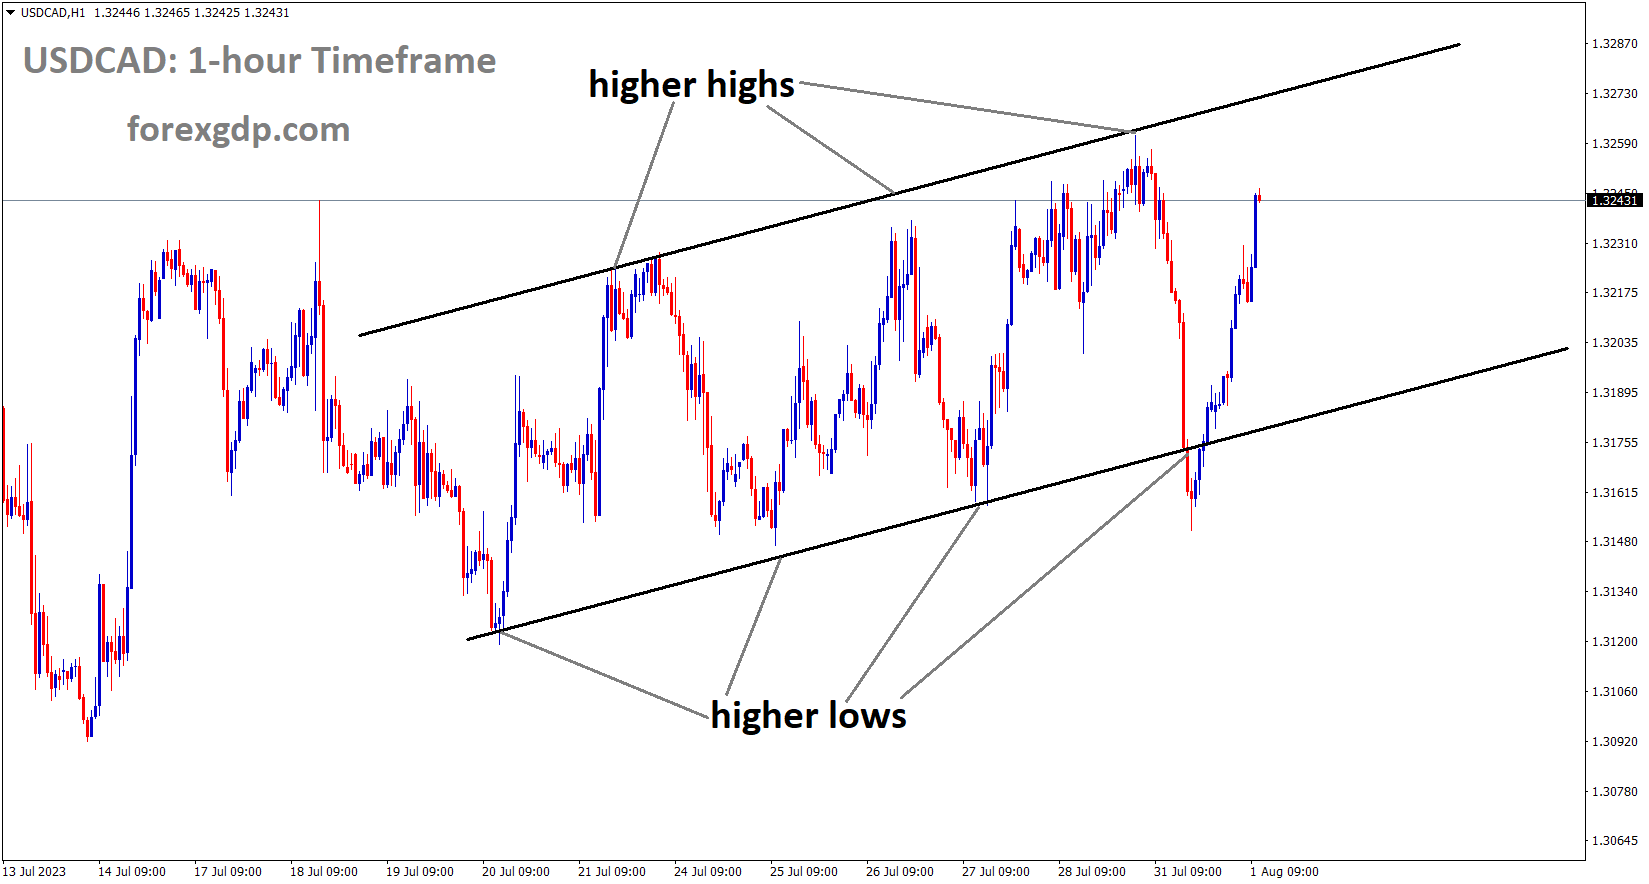 USDCAD is moving in an Ascending channel and the market has rebounded from the higher low area of the channel